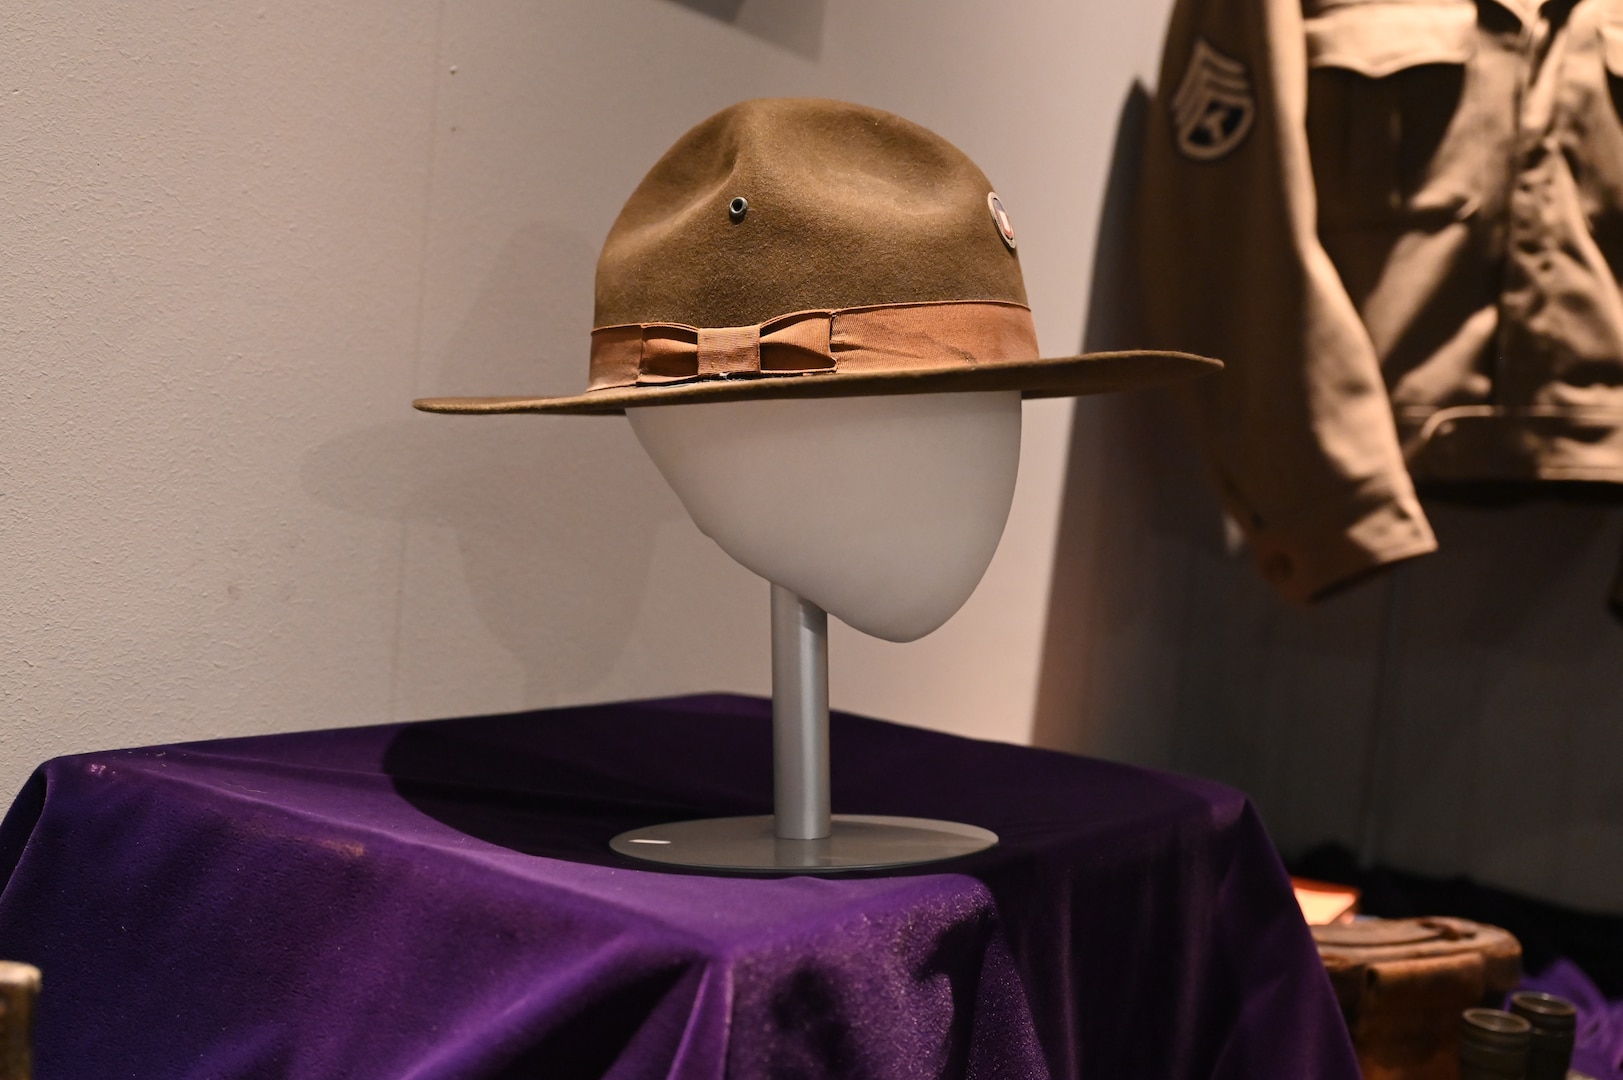 A hat worn by a member of the 29th Infantry Division (29ID) is on display in the District of Columbia National Guard Museum highlighting the contributions of eight mobilized units in support of WWII in Europe, the Pacific and at home, June 5, 2024. Three landed on Omaha Beach and fought in the Battle of Normandy or Operation Overlord (D-Day): The 29th Military Police Platoon (MP PLT), Headquarters and Headquarters Company (HHC) of the 29th Infantry Division (29ID), and the 121st Engineer Combat Battalion (ECB).